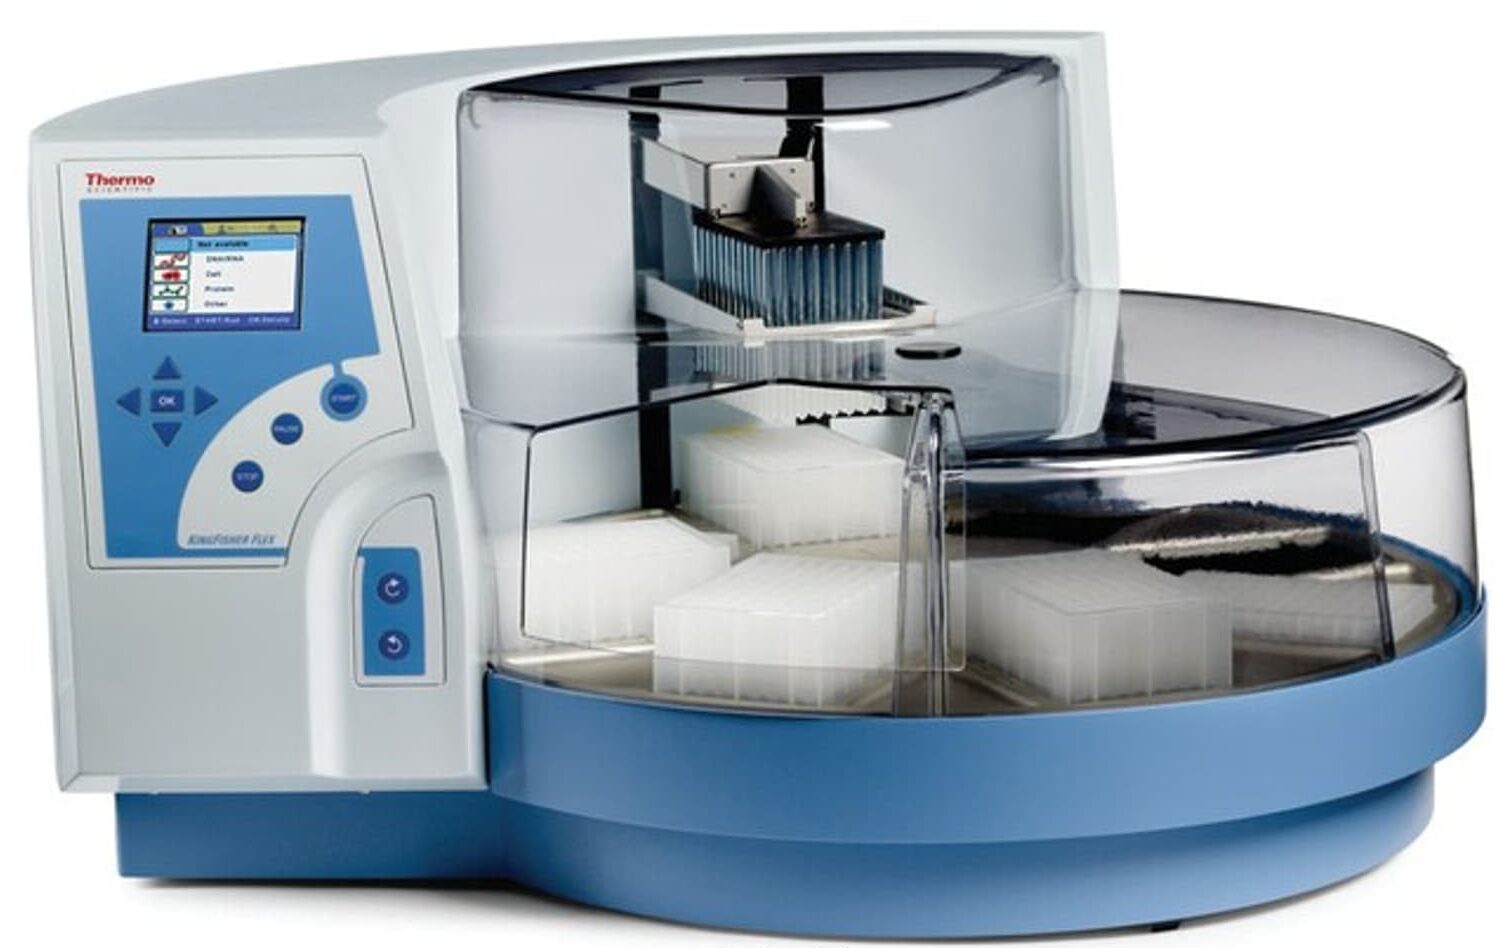 The Thermo Scientific KingFisher Flex instrument uses revolutionary magnetic particle separation technology to excellent reproducibility and quality in demanding high throughput workflows.